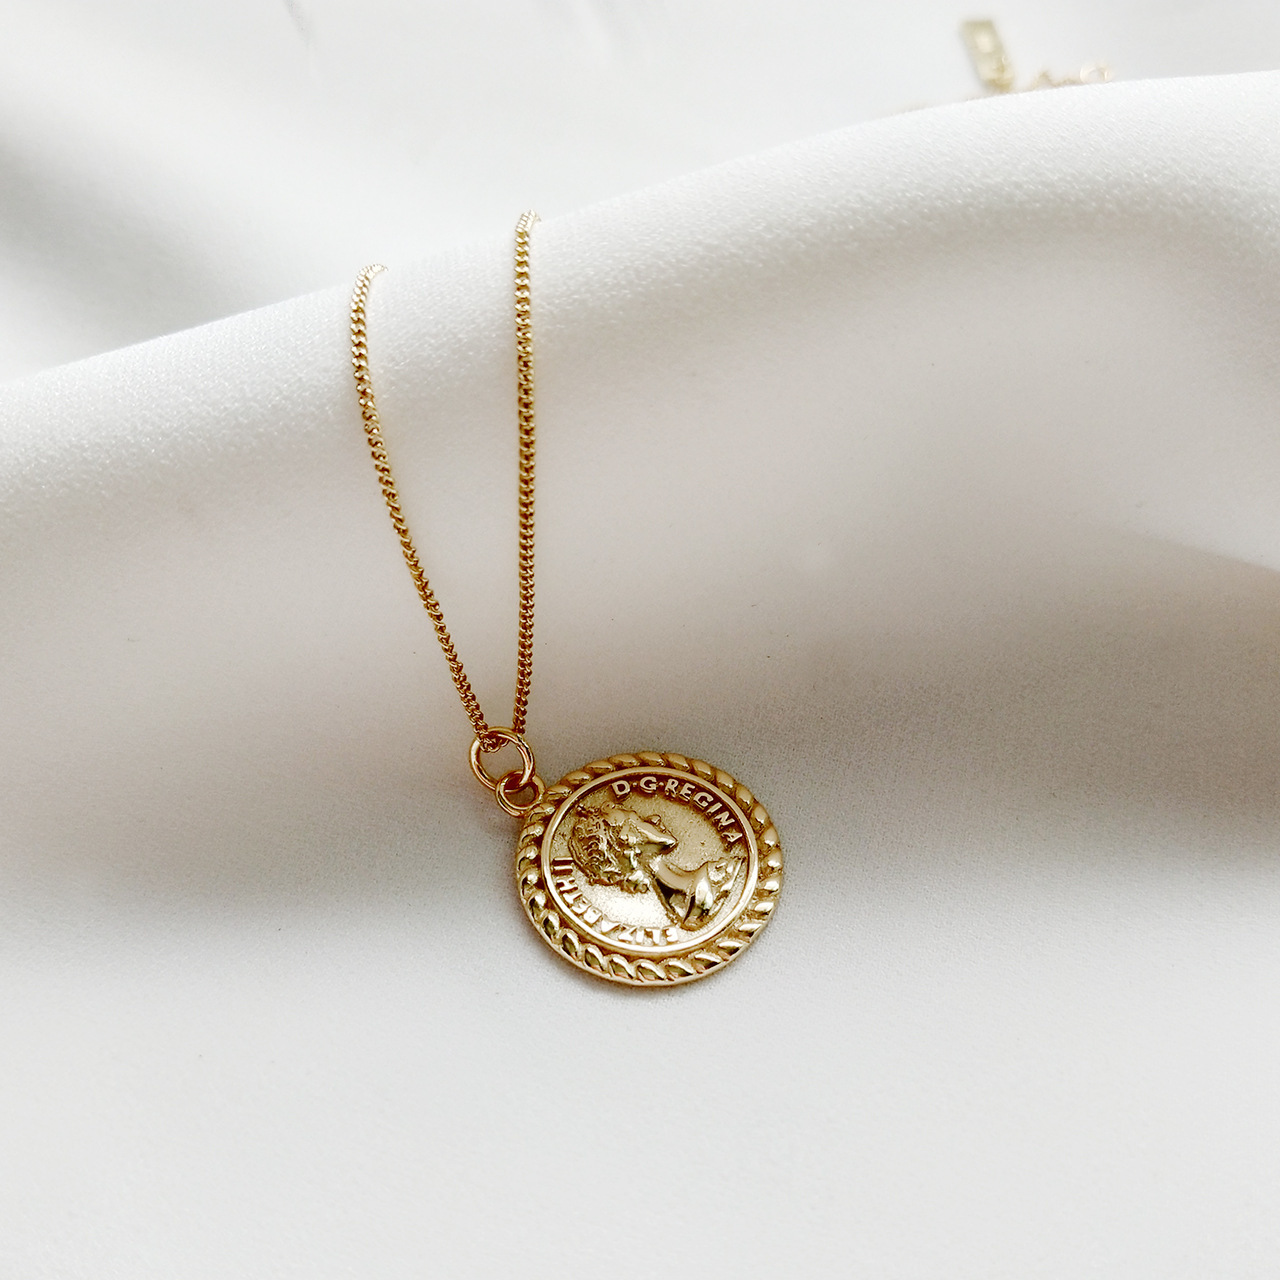 2015 One Penny Coin Necklace, 9th Anniversary Gift- Rose Gold